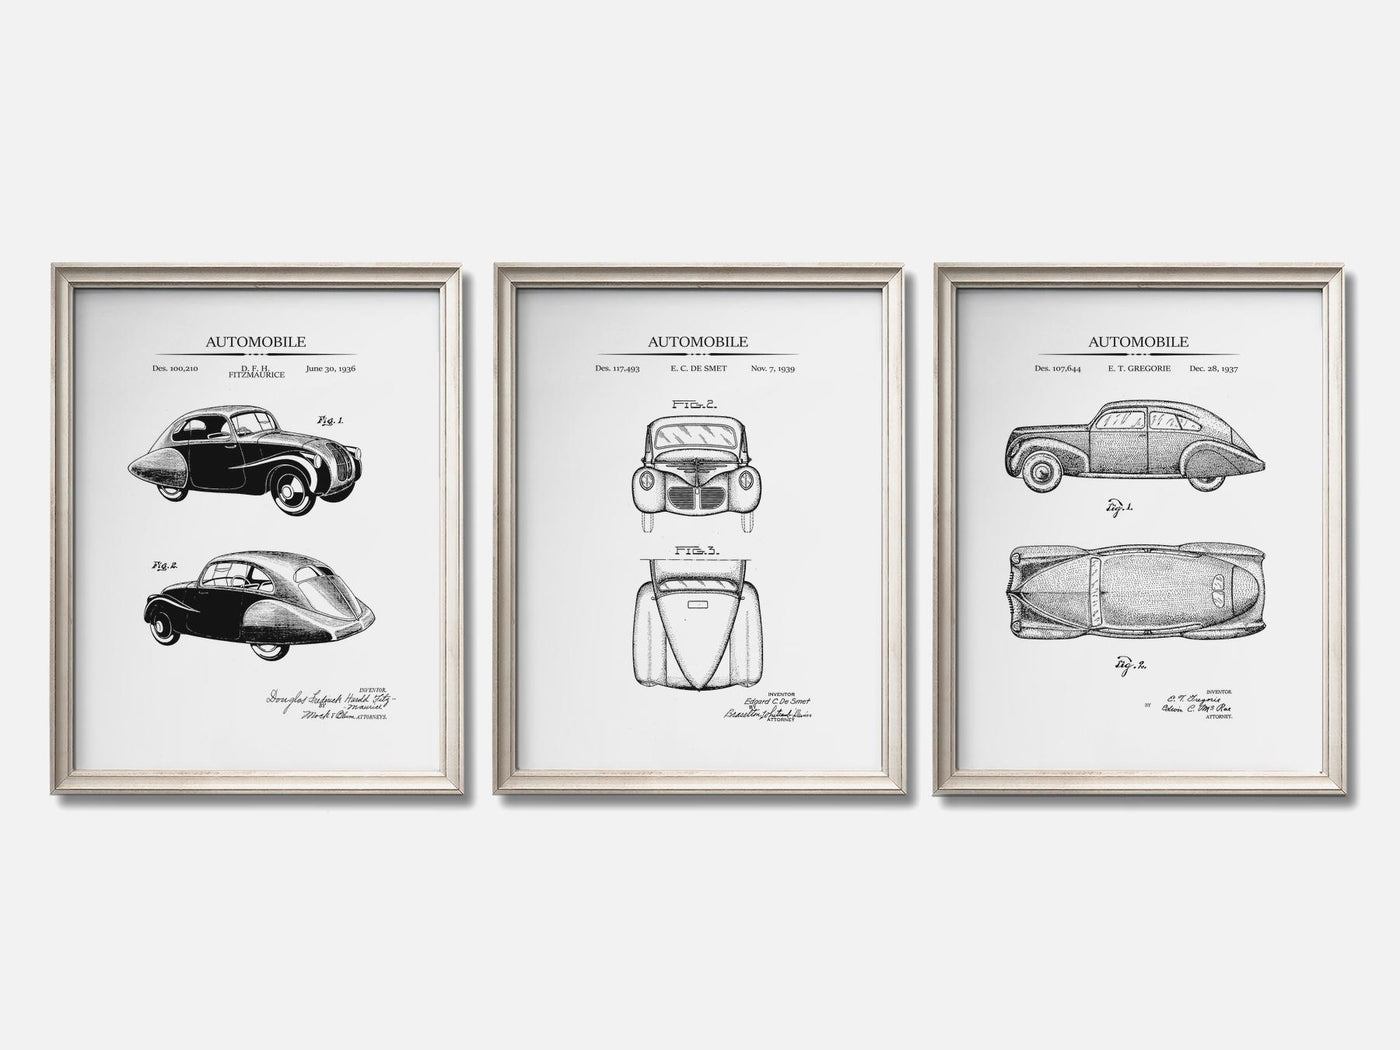 30s Cars Patent Print Set of 3 mockup - A_t10134-V1-PC_F+O-SS_3-PS_11x14-C_whi variant